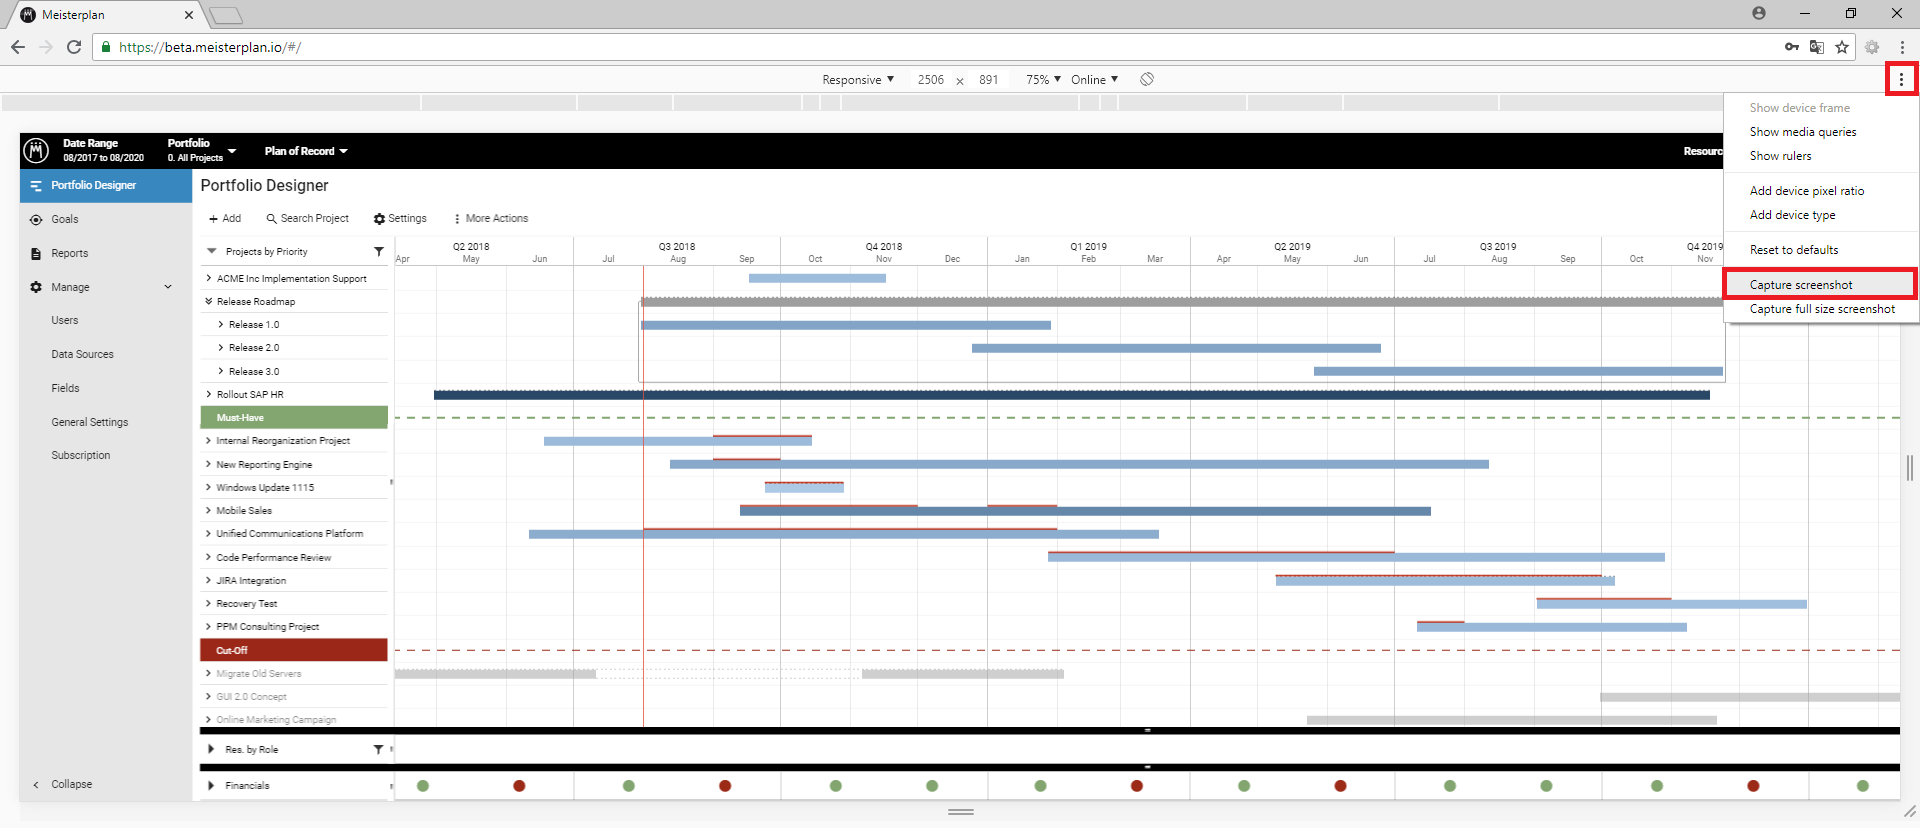 Exporting or Printing the Gantt Chart